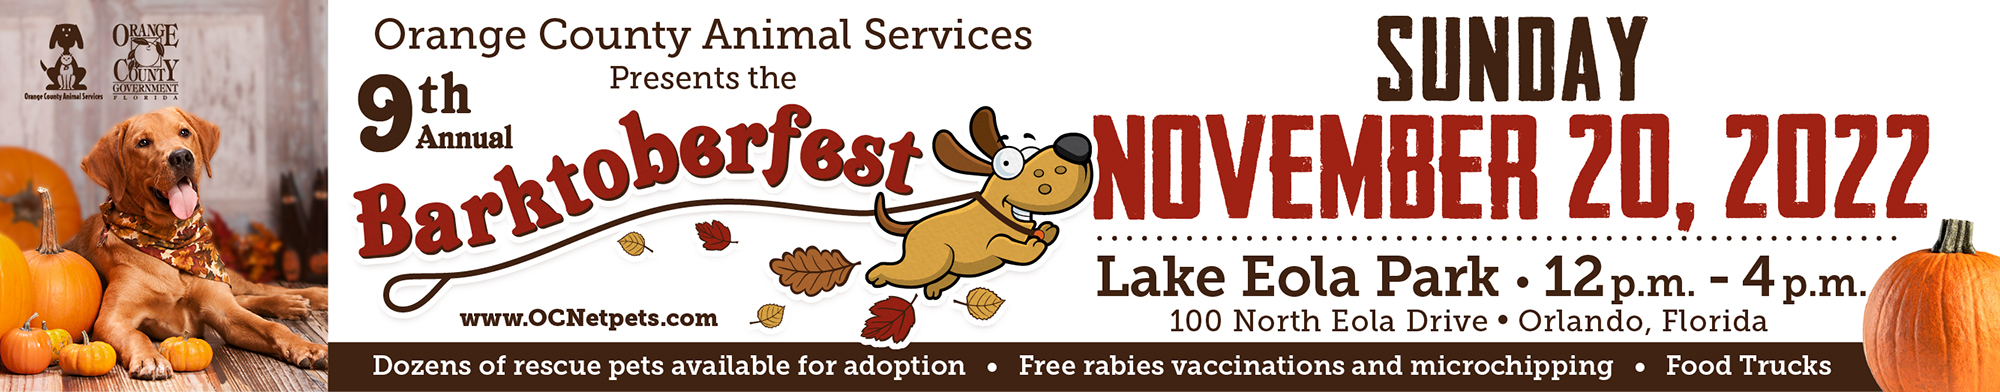 Orange County Animal Services 9th Annual Barktoberfest - Sunday November 20, 2022 - Lake Eola Park 12pm - 4pm - 100 North Eola Drive Orlando, FL - Dozens of rescue oets available for adoption - Free rabies vaccinations and microchipping - Food Trucks